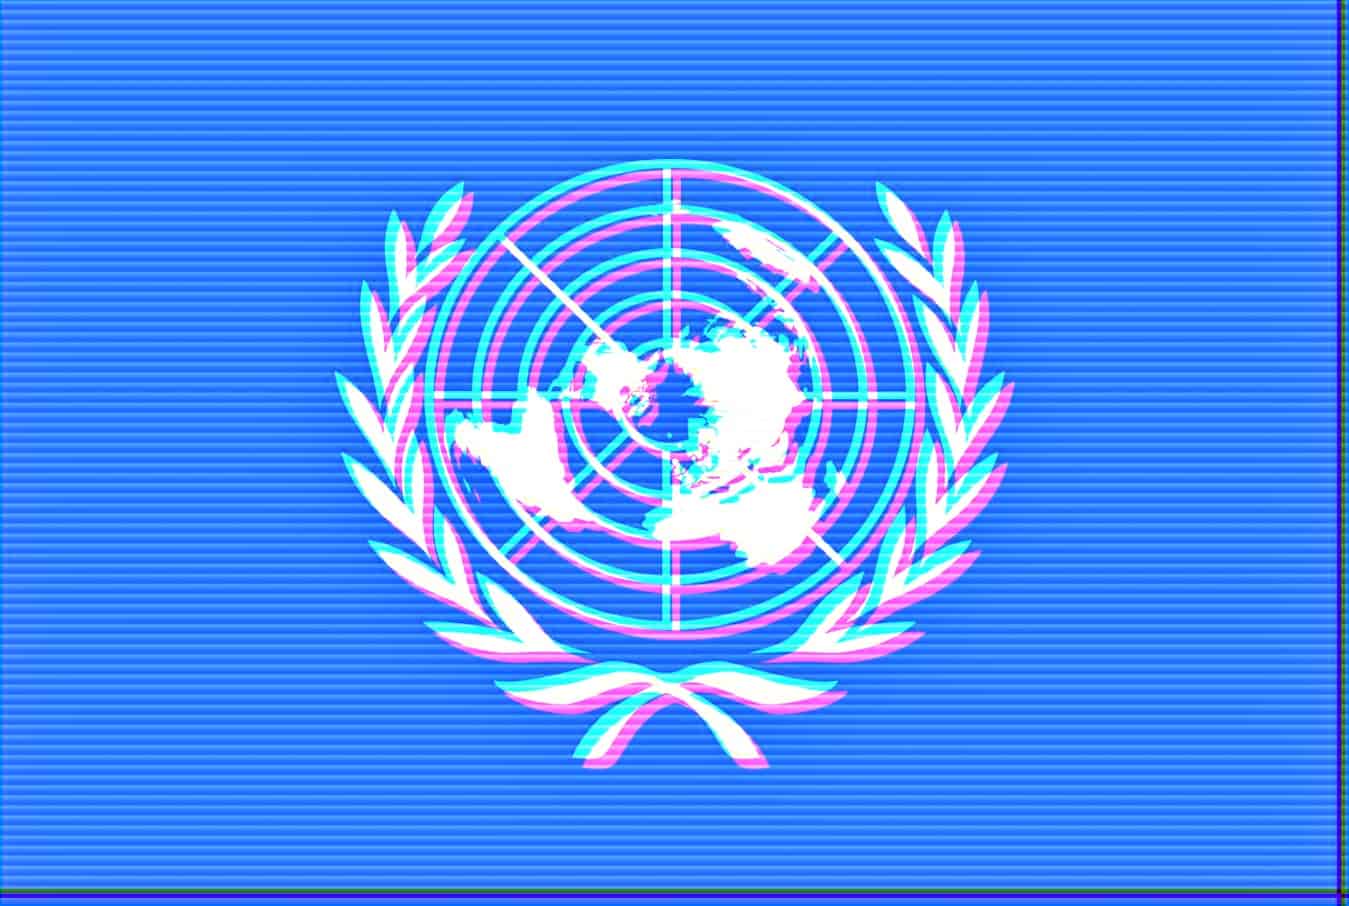 UN hacked for good as 100K+ employee records accessed